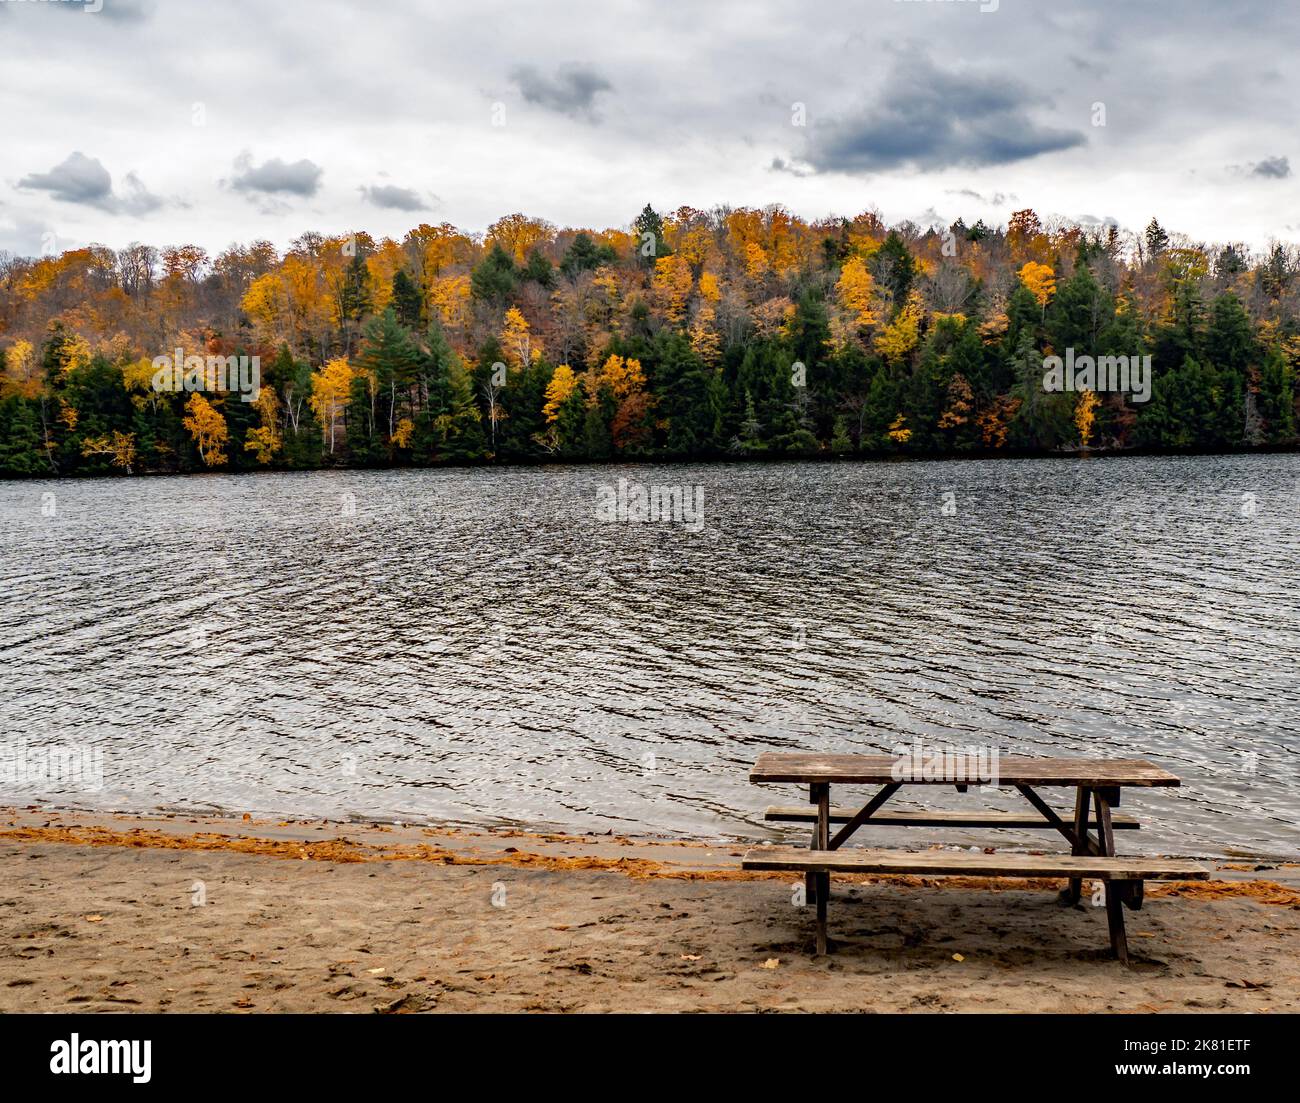 Scenic view of a wooden picnic on a beach on a cold autumn day in October with the river and colorful autumn trees in the background. Stock Photo